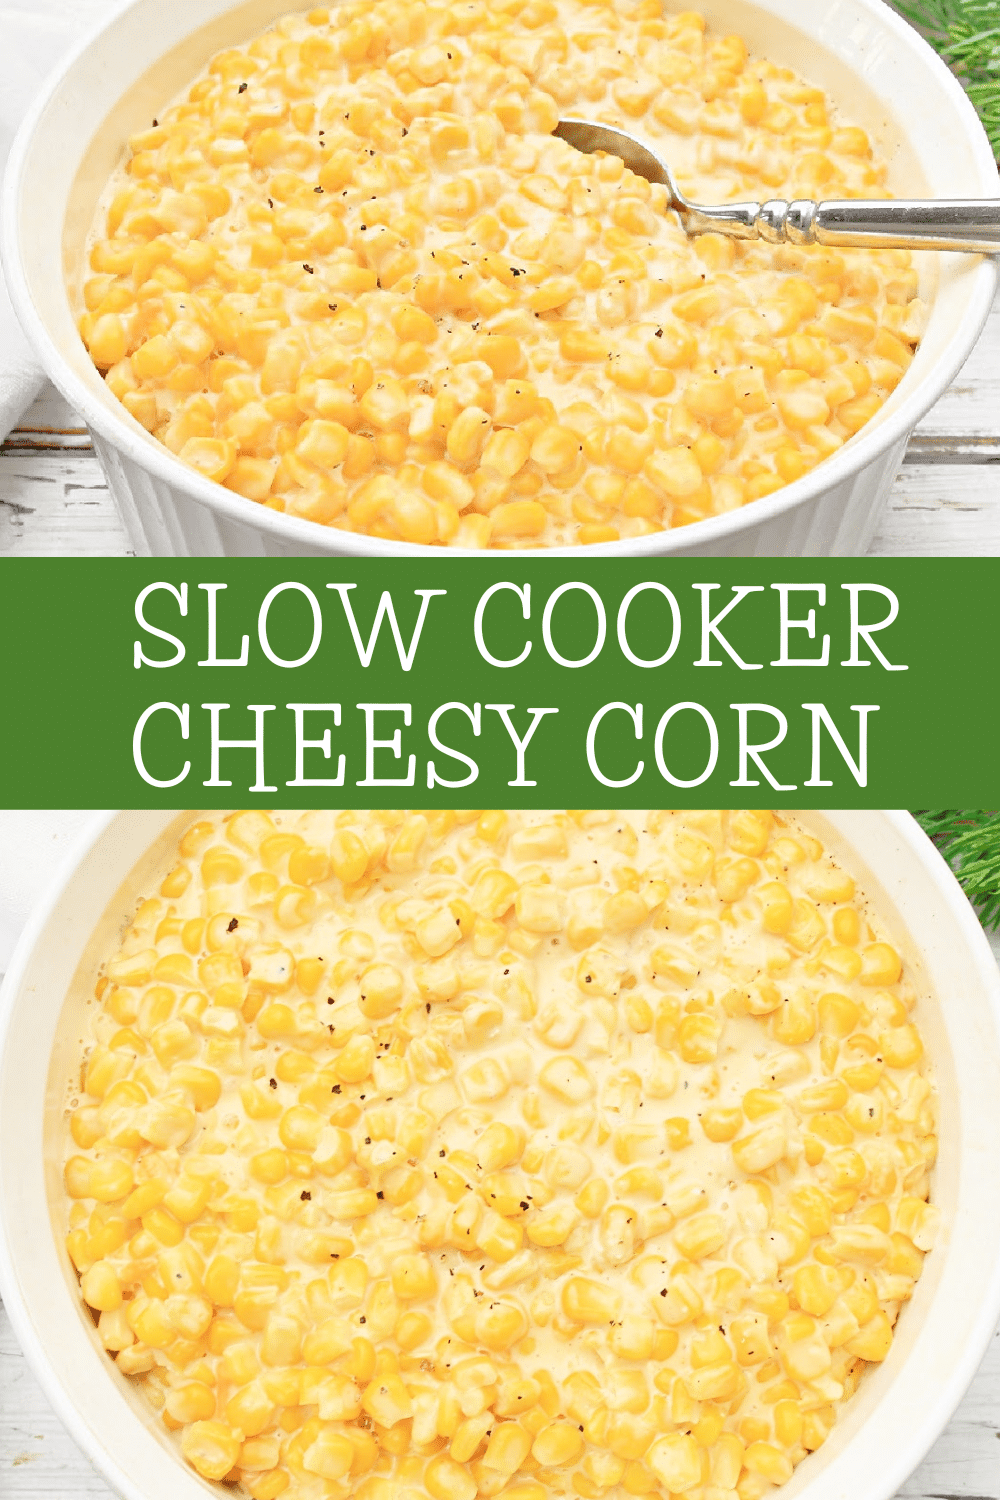 Slow Cooker Cheesy Corn ~ Creamy corn casserole that's always a crowd-pleaser! Ready to serve in 3-4 hours. via @thiswifecooks